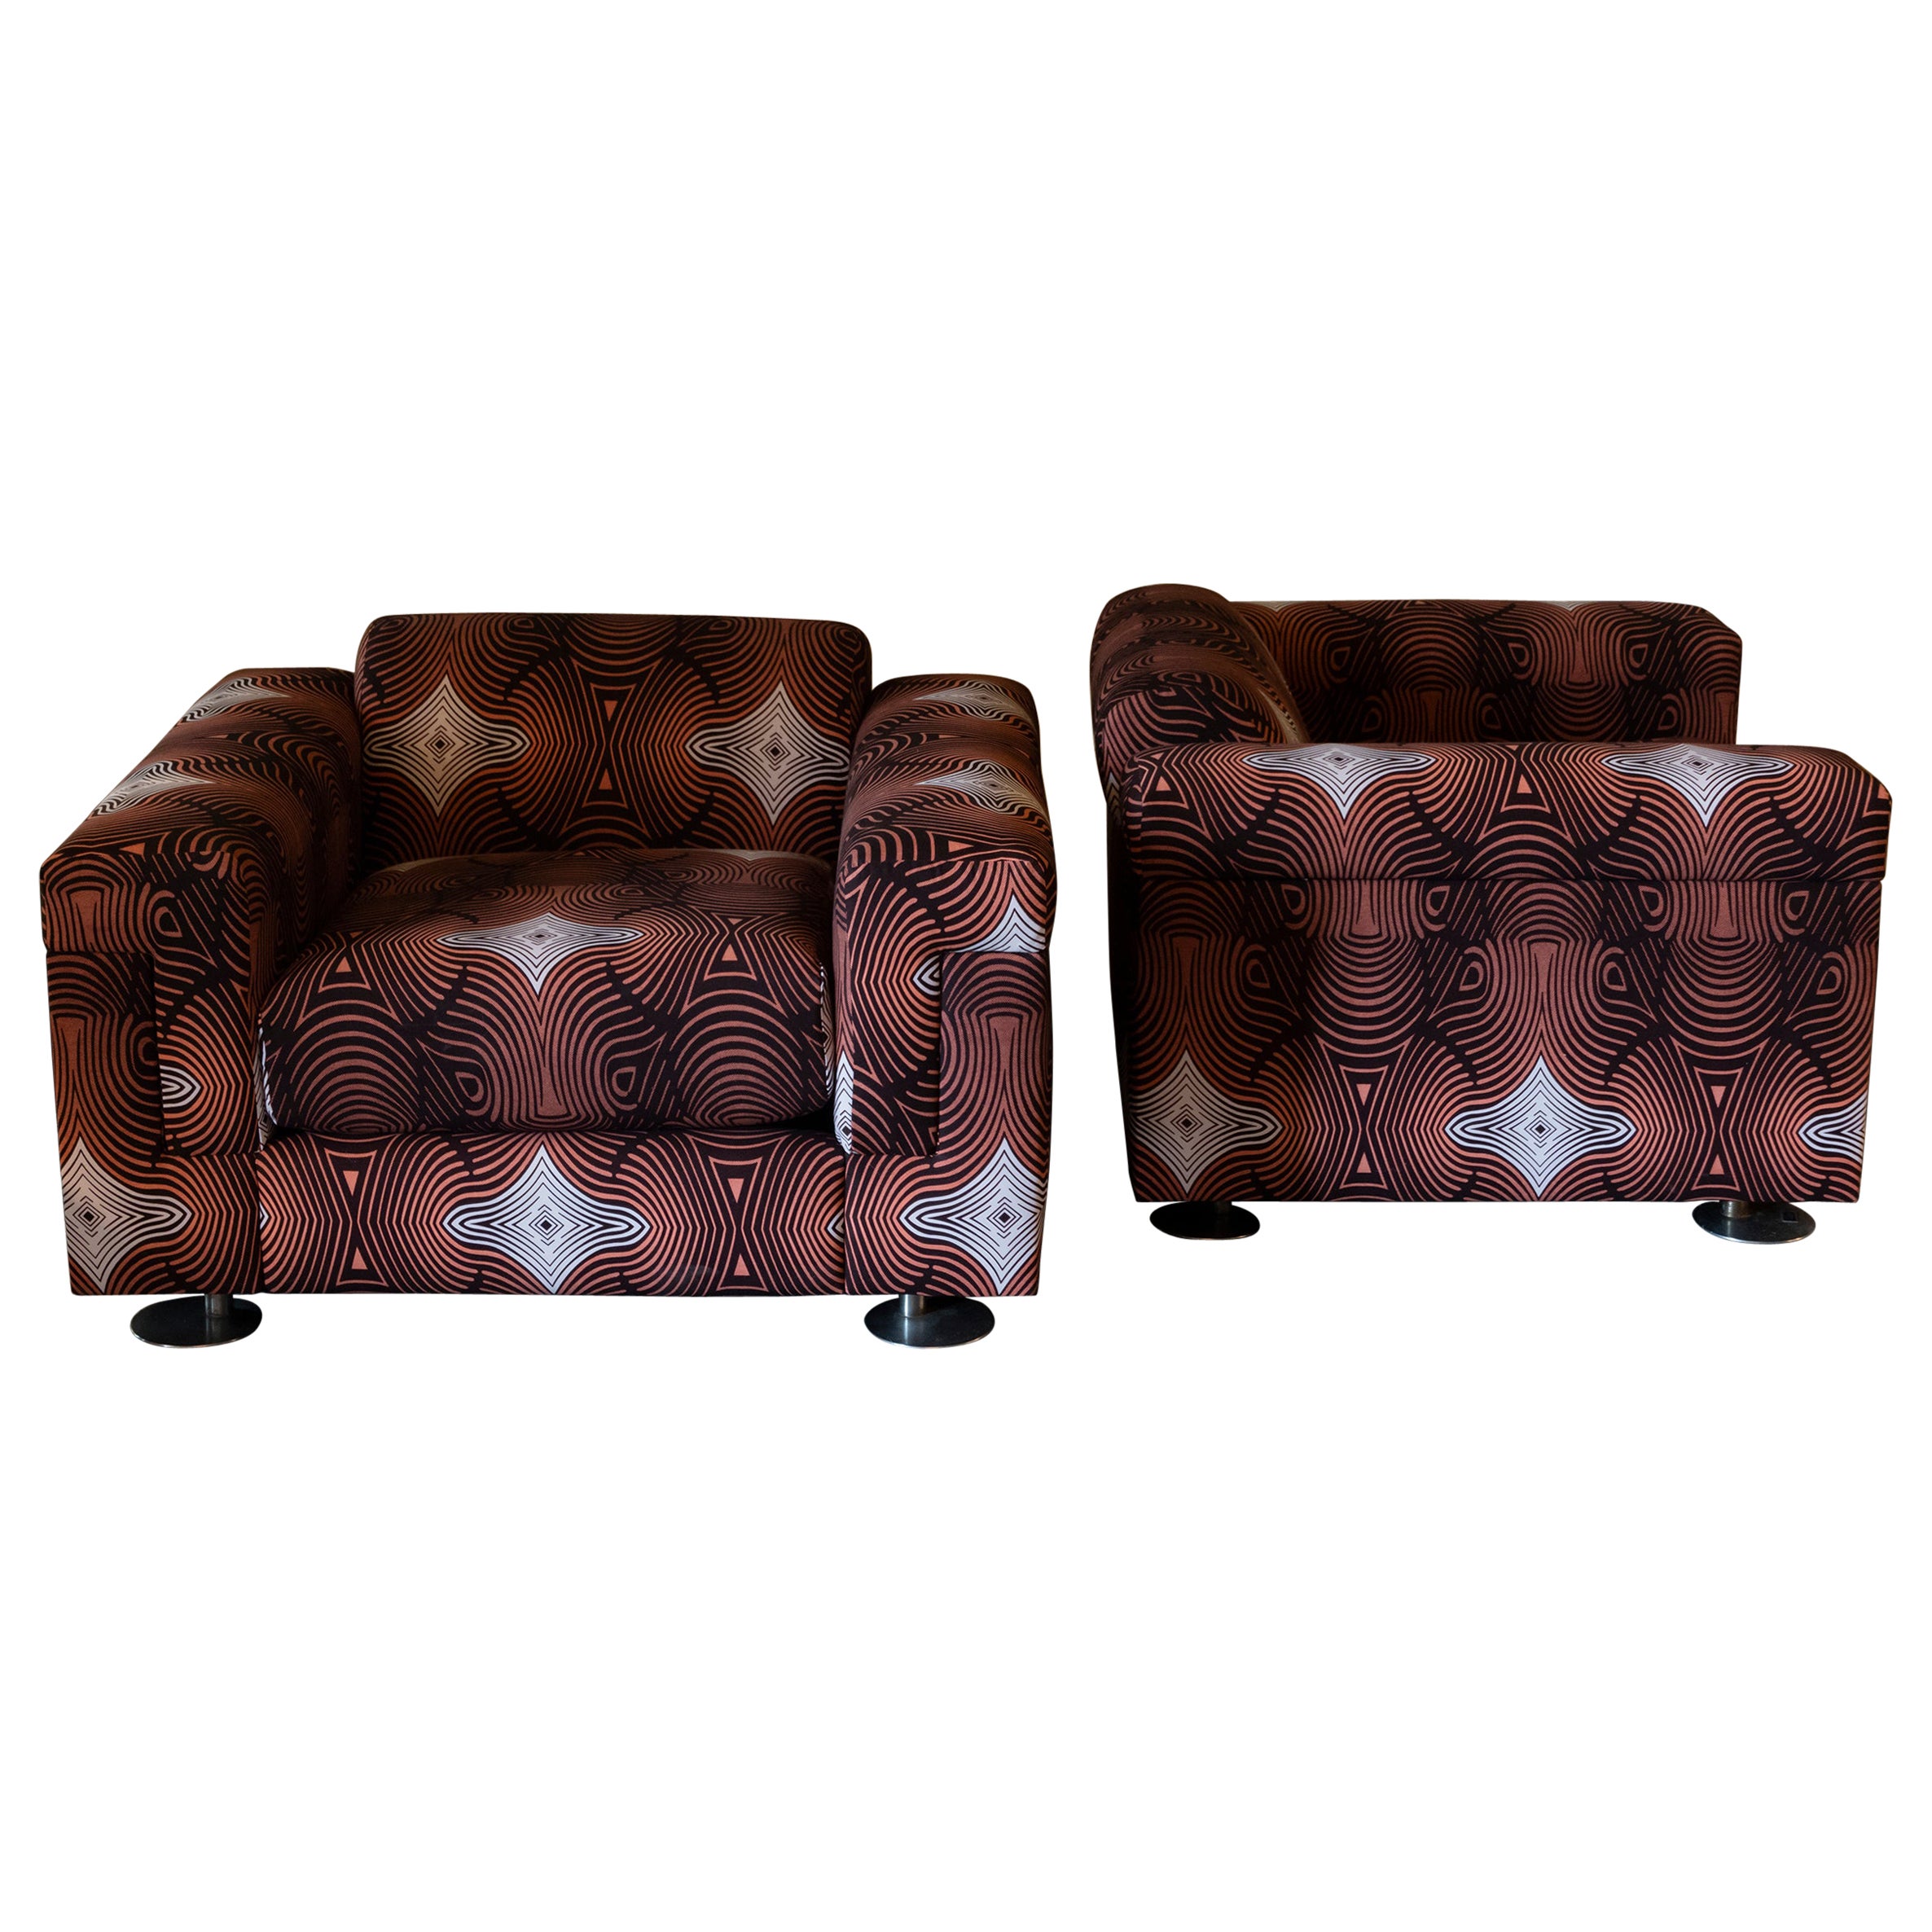 Pair of Tecno Armchairs Upholstered in Orange/Black Jacquard Fabric, Italy, 1966 For Sale